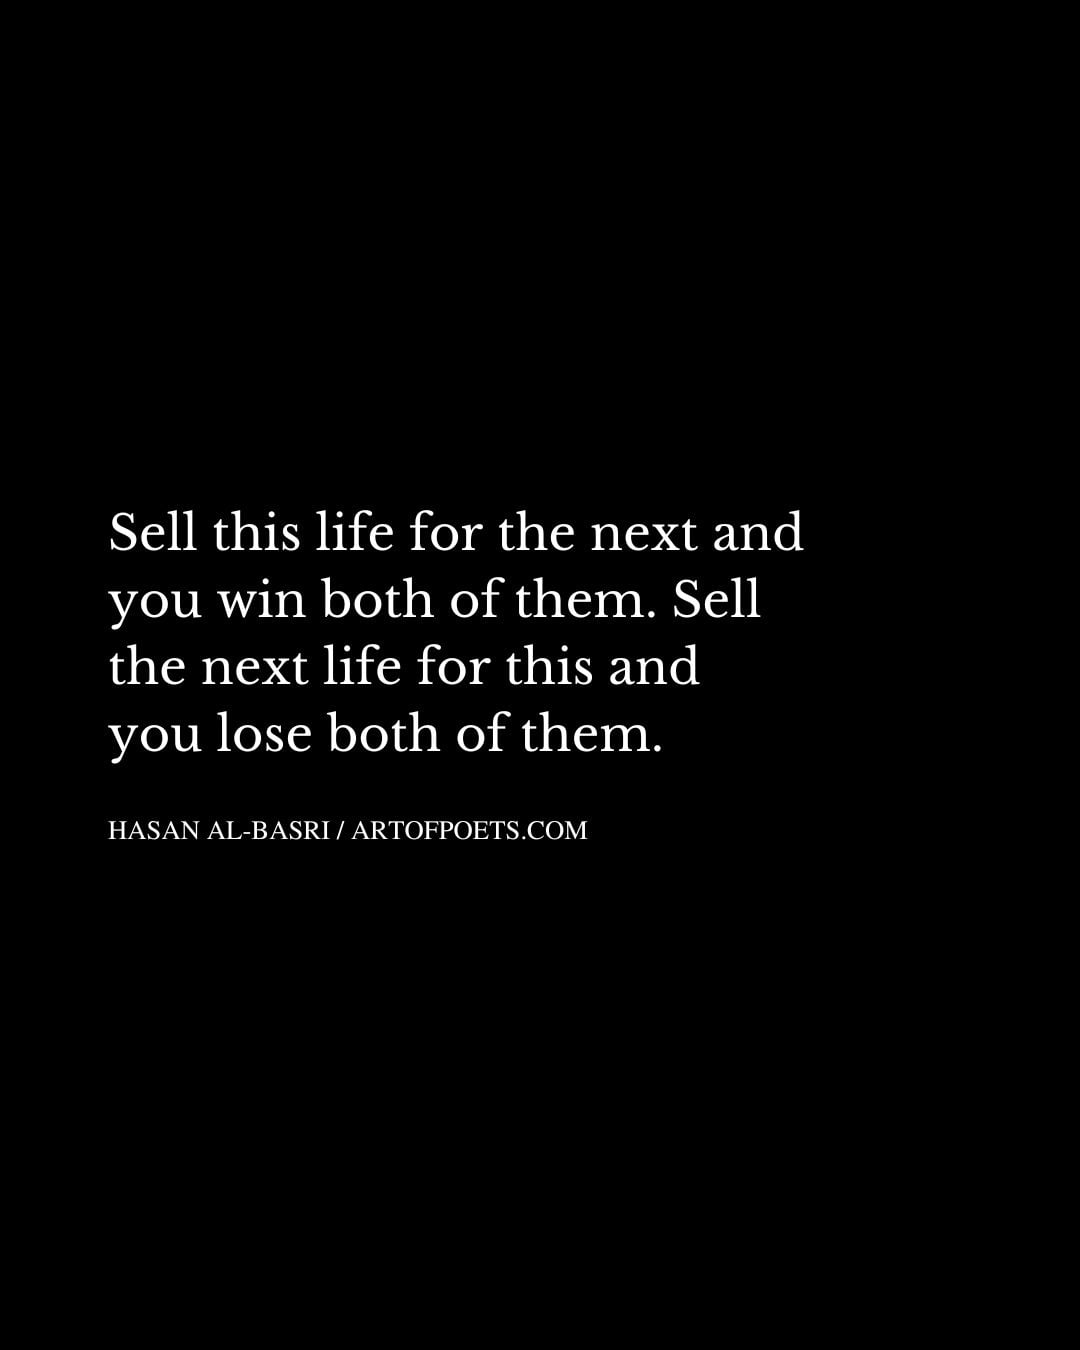 Sell this life for the next and you win both of them. Sell the next life for this and you lose both of them